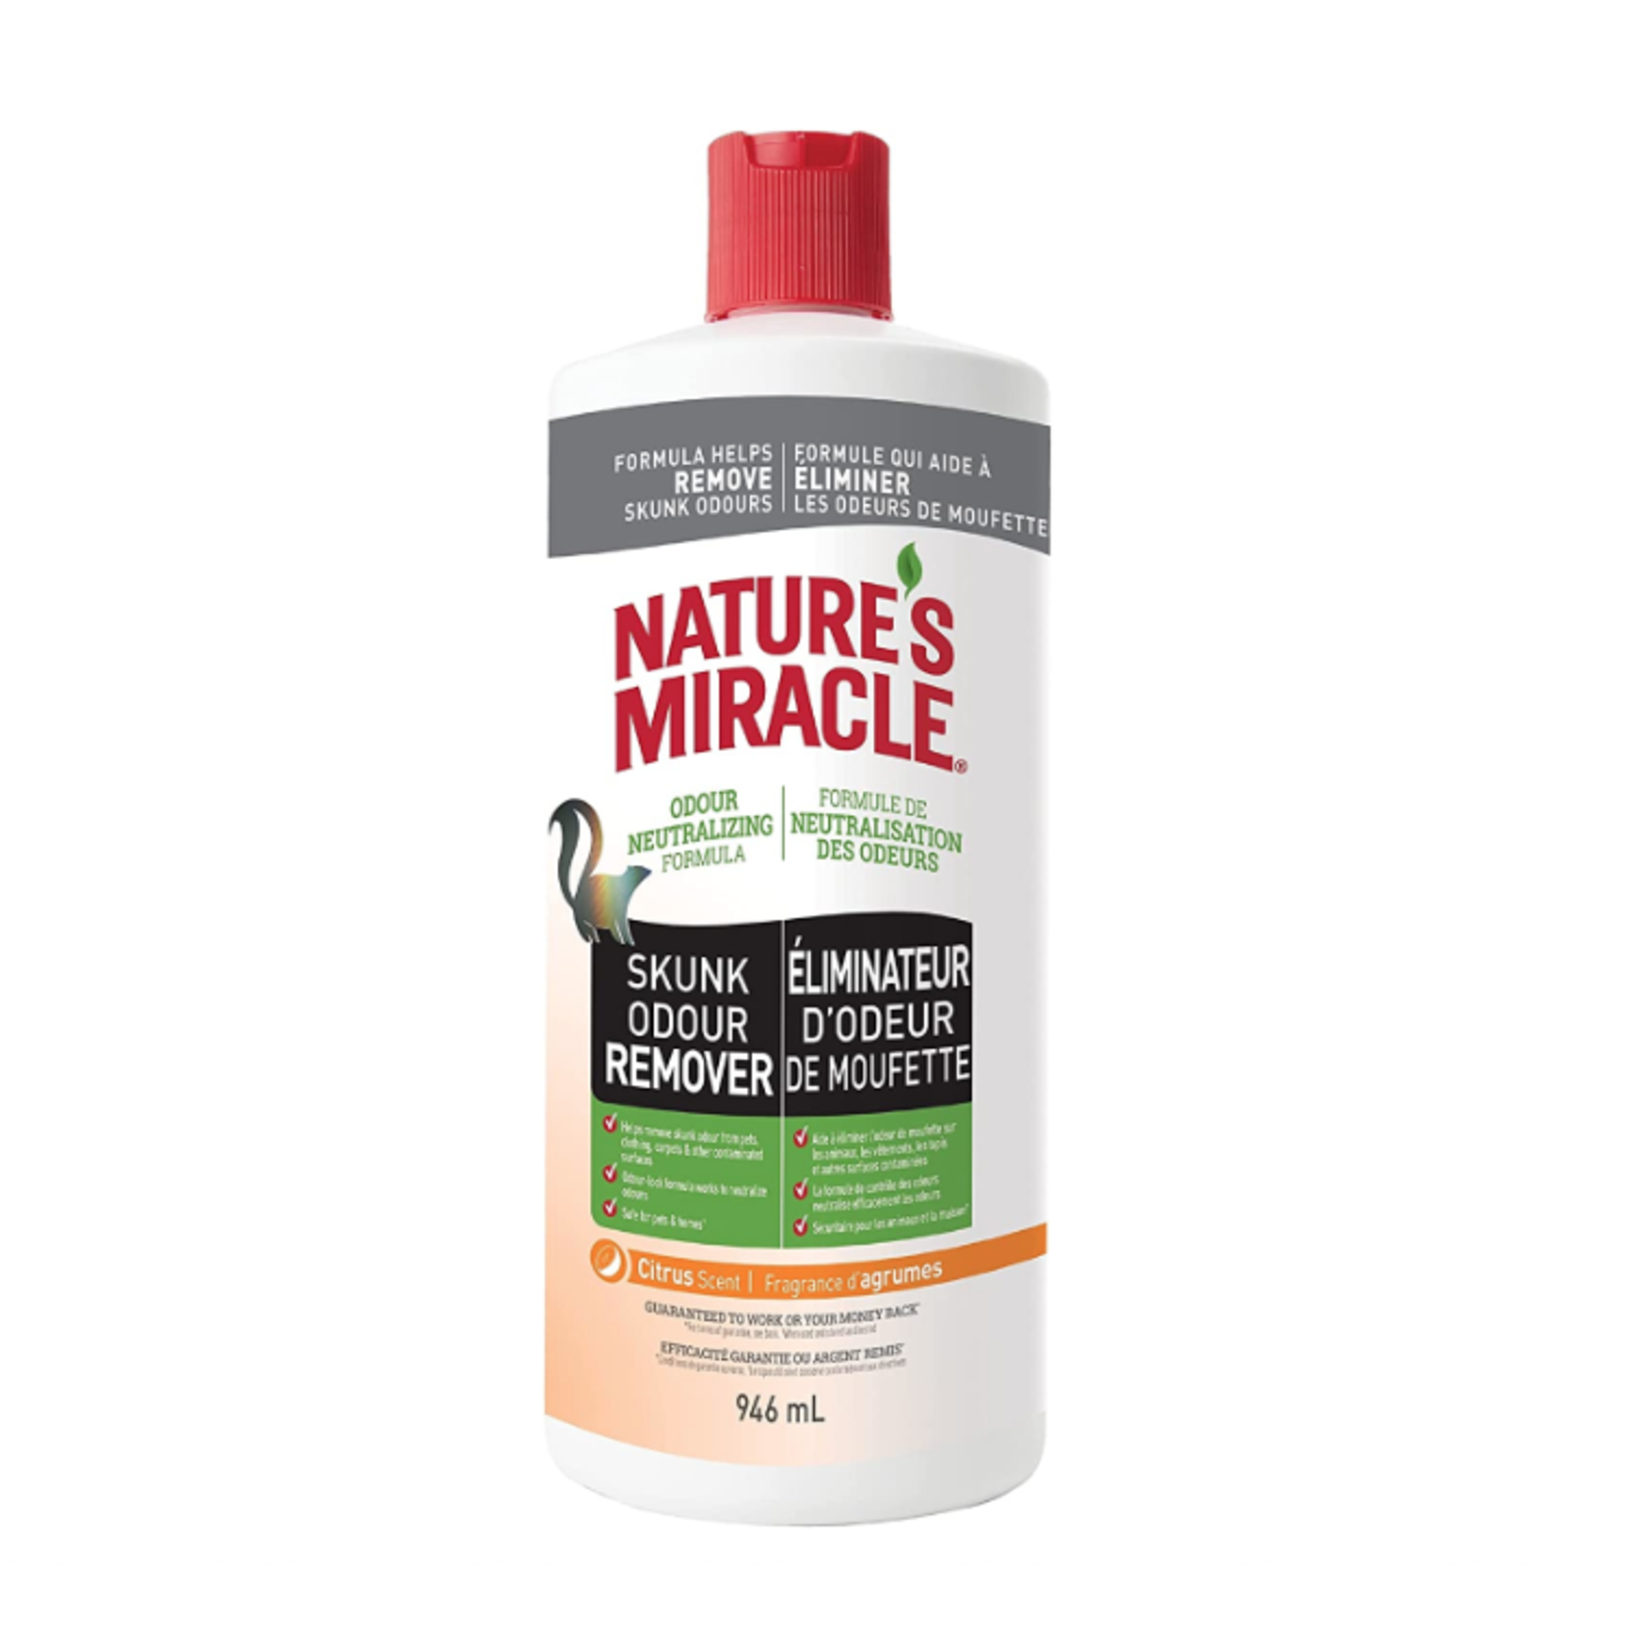 NATURES MIRACLE Spectrum Nature's Miracle Skunk Odor Remover Citrus 32oz